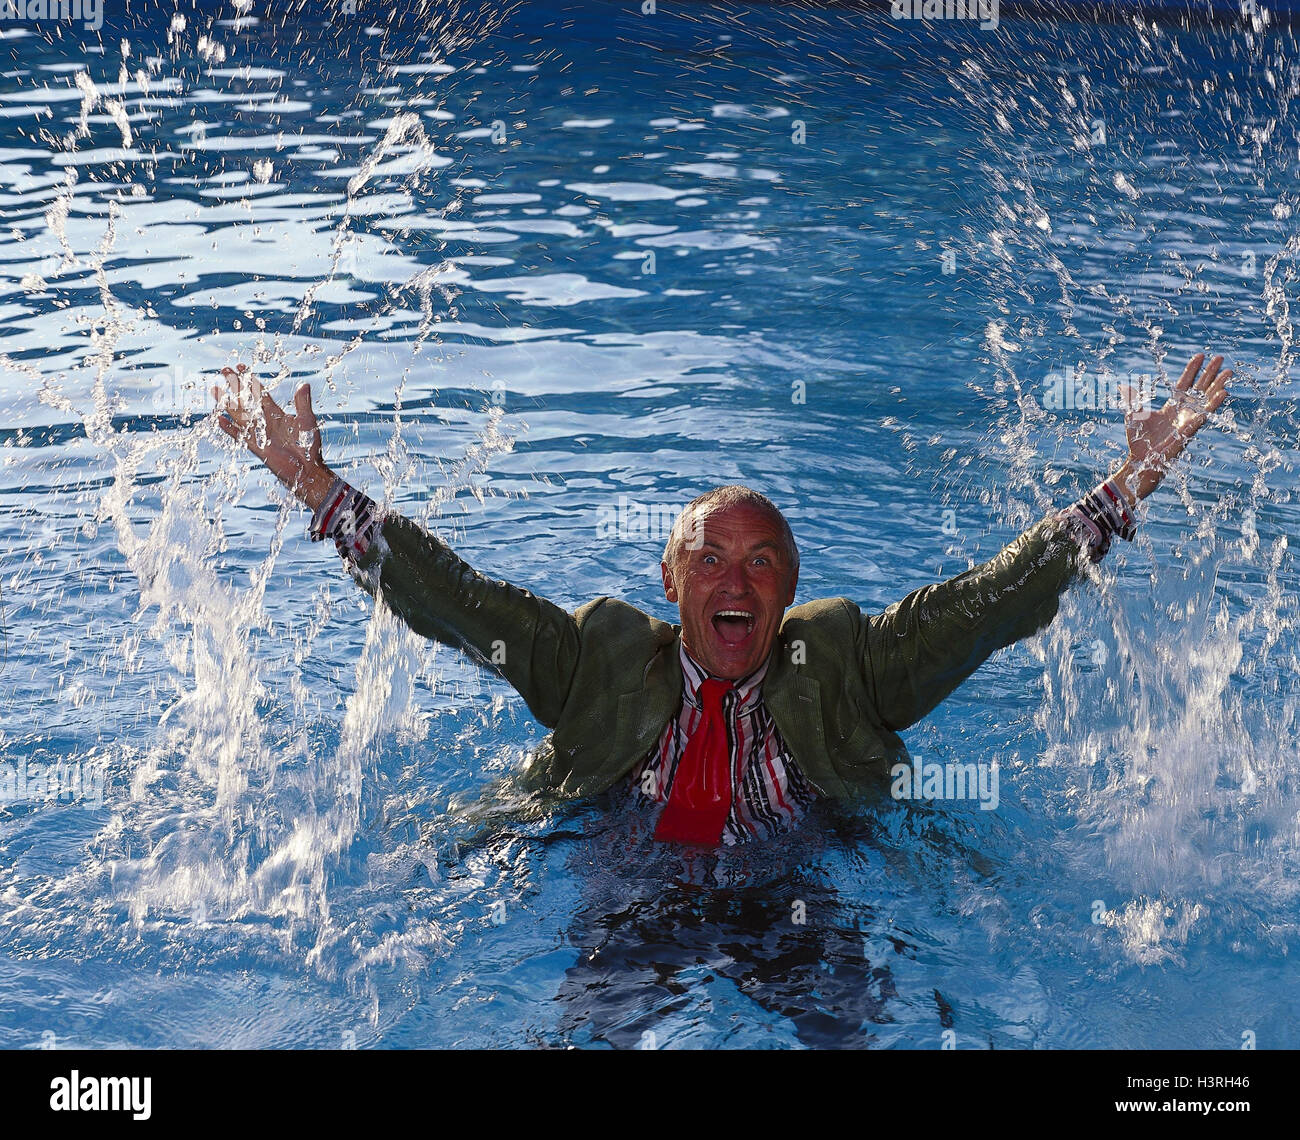 Man, middle old person, water, shout, gesture, clothes, wet, lake, sea, senior, arms rised, facial play, shout, emotion, rejoice, joy, enthusiasm, splash, refreshment, cry for help, predicament, desperation, fear, panic, drown, decline, non-float, outside Stock Photo